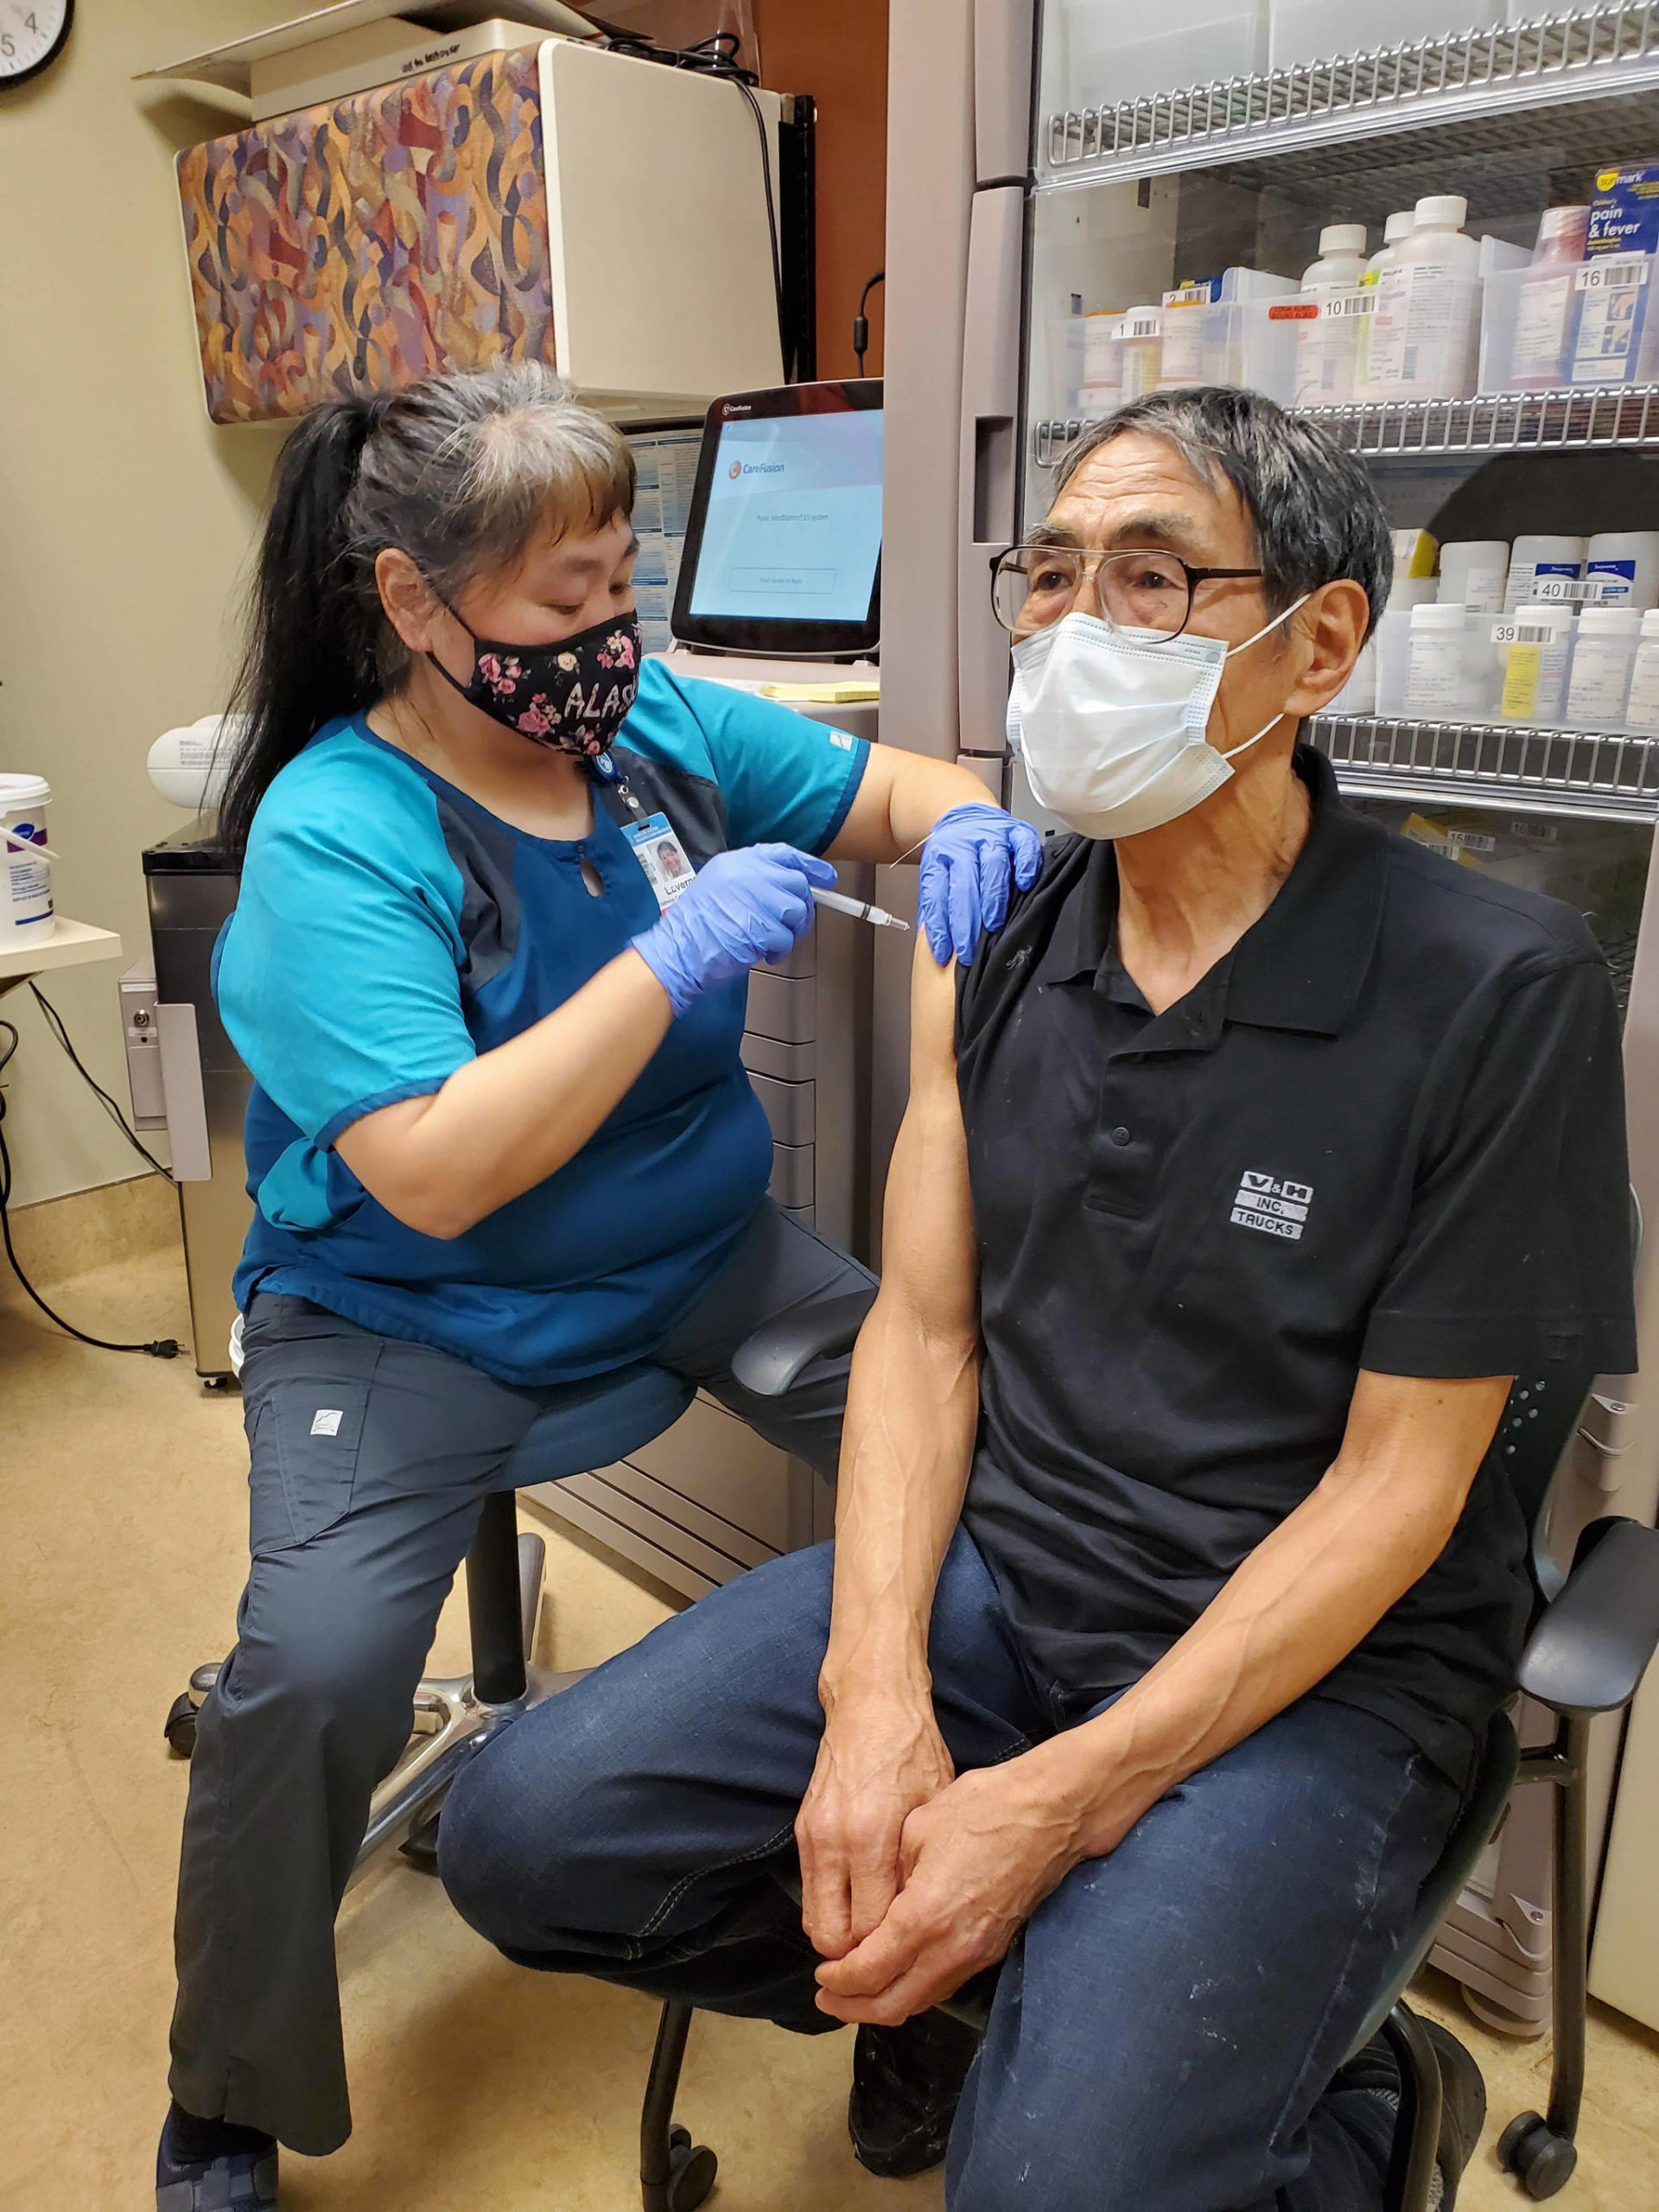 In this photo provided by Norton Sound Health Corp., is nurse LaVerne Saccheus providing a vaccination to Unalakleet elder Joseph “Nupid” Katchatag in Unalakleet, Alaska, on Dec. 23, 2020. Alaska’s highest vaccination rates among those 16 or older have been in some of its remotest, hardest-to-access communities, where the toll of past flu or tuberculosis outbreaks hasn’t been forgotten. (Carol Charles/Norton Sound Health Corp. via AP)